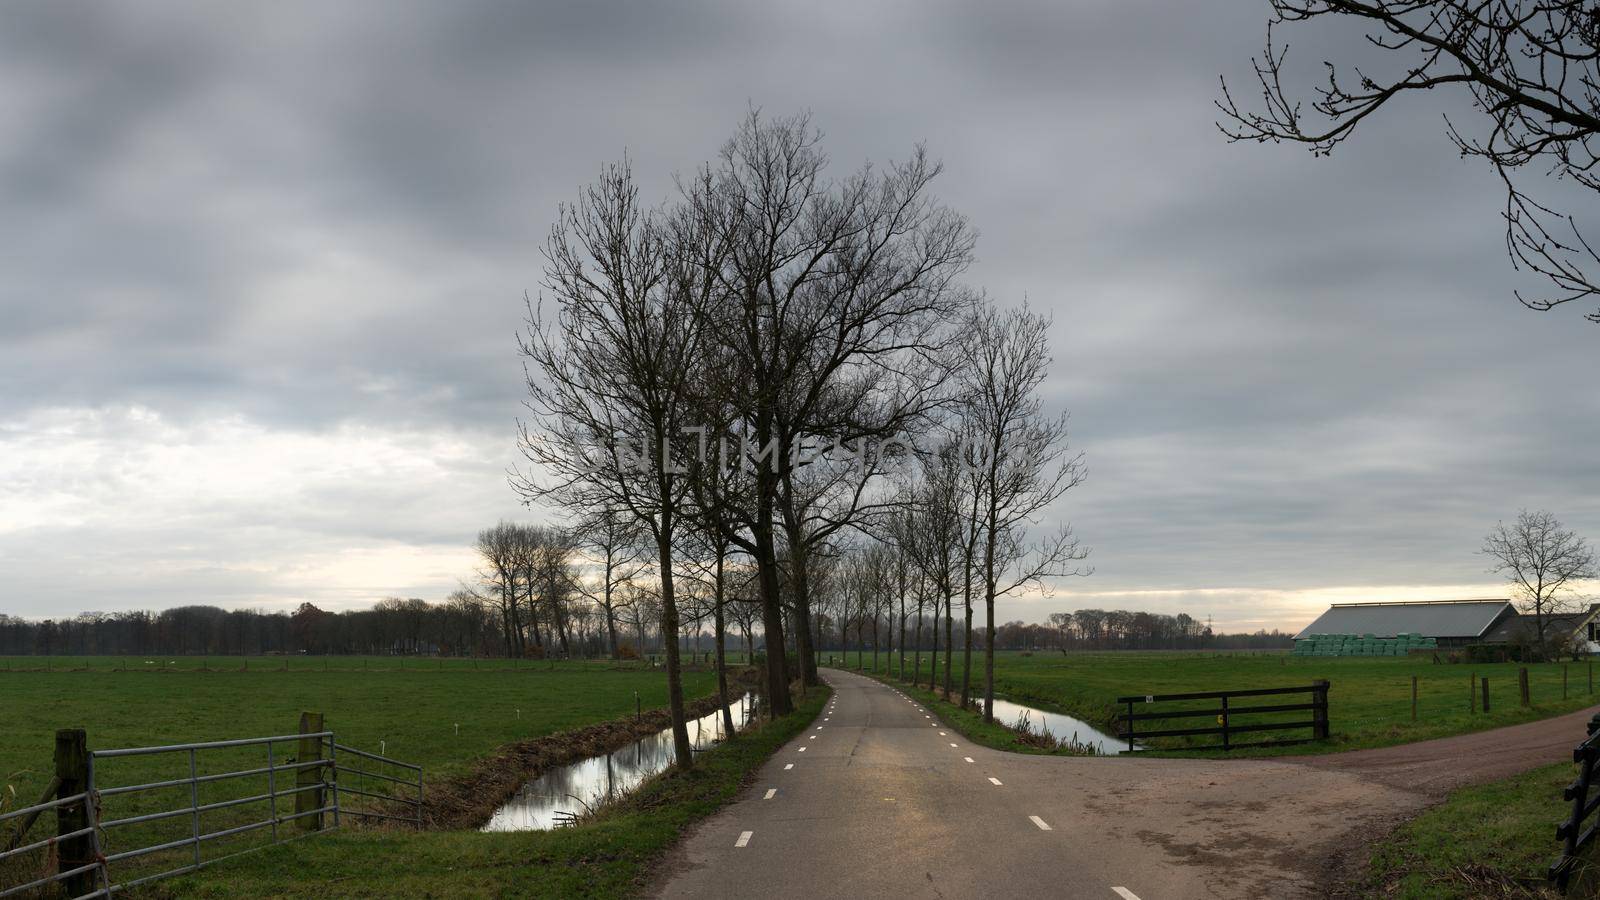 Meadow and countryroad at dusk in rainy weather in The Netherlands